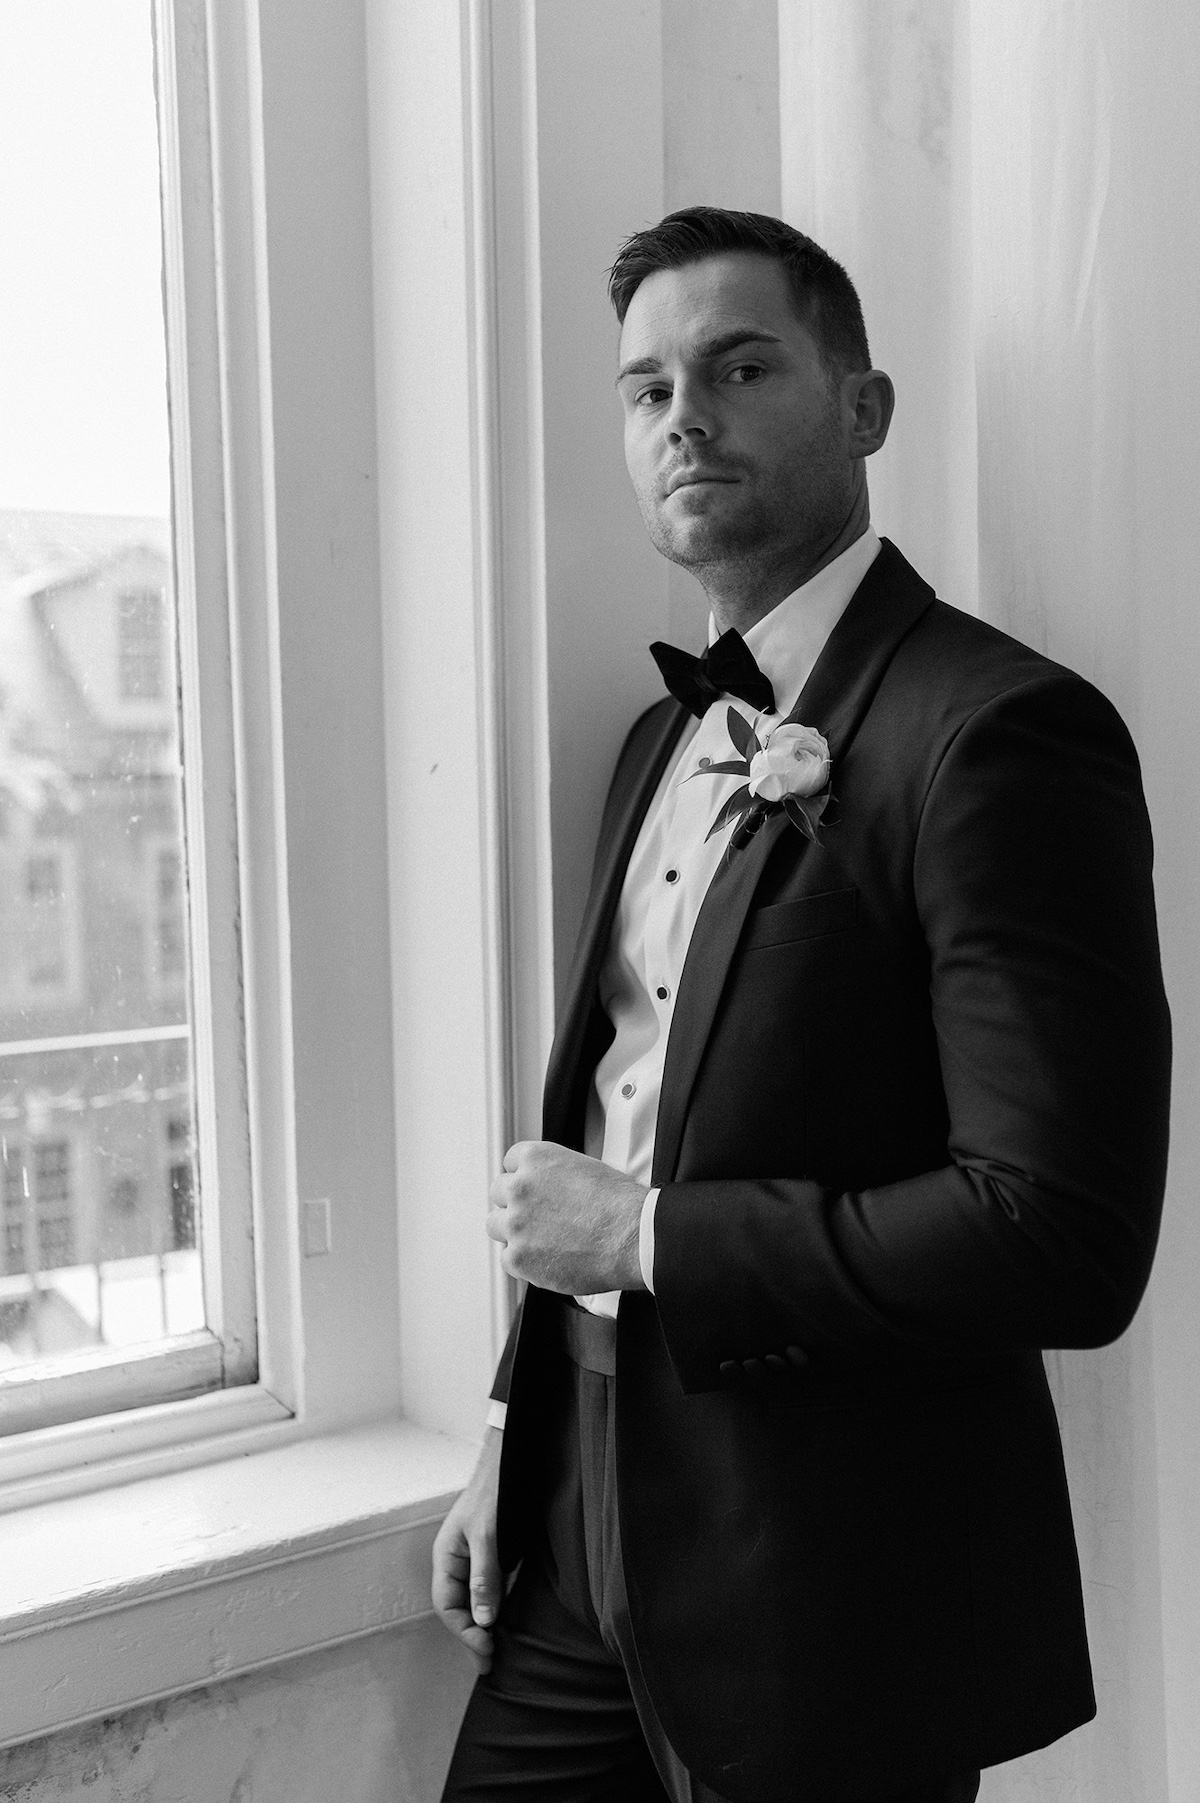 Timeless editorial portrait capturing the groom's gaze, expressing a mix of emotion and high-end sophistication.